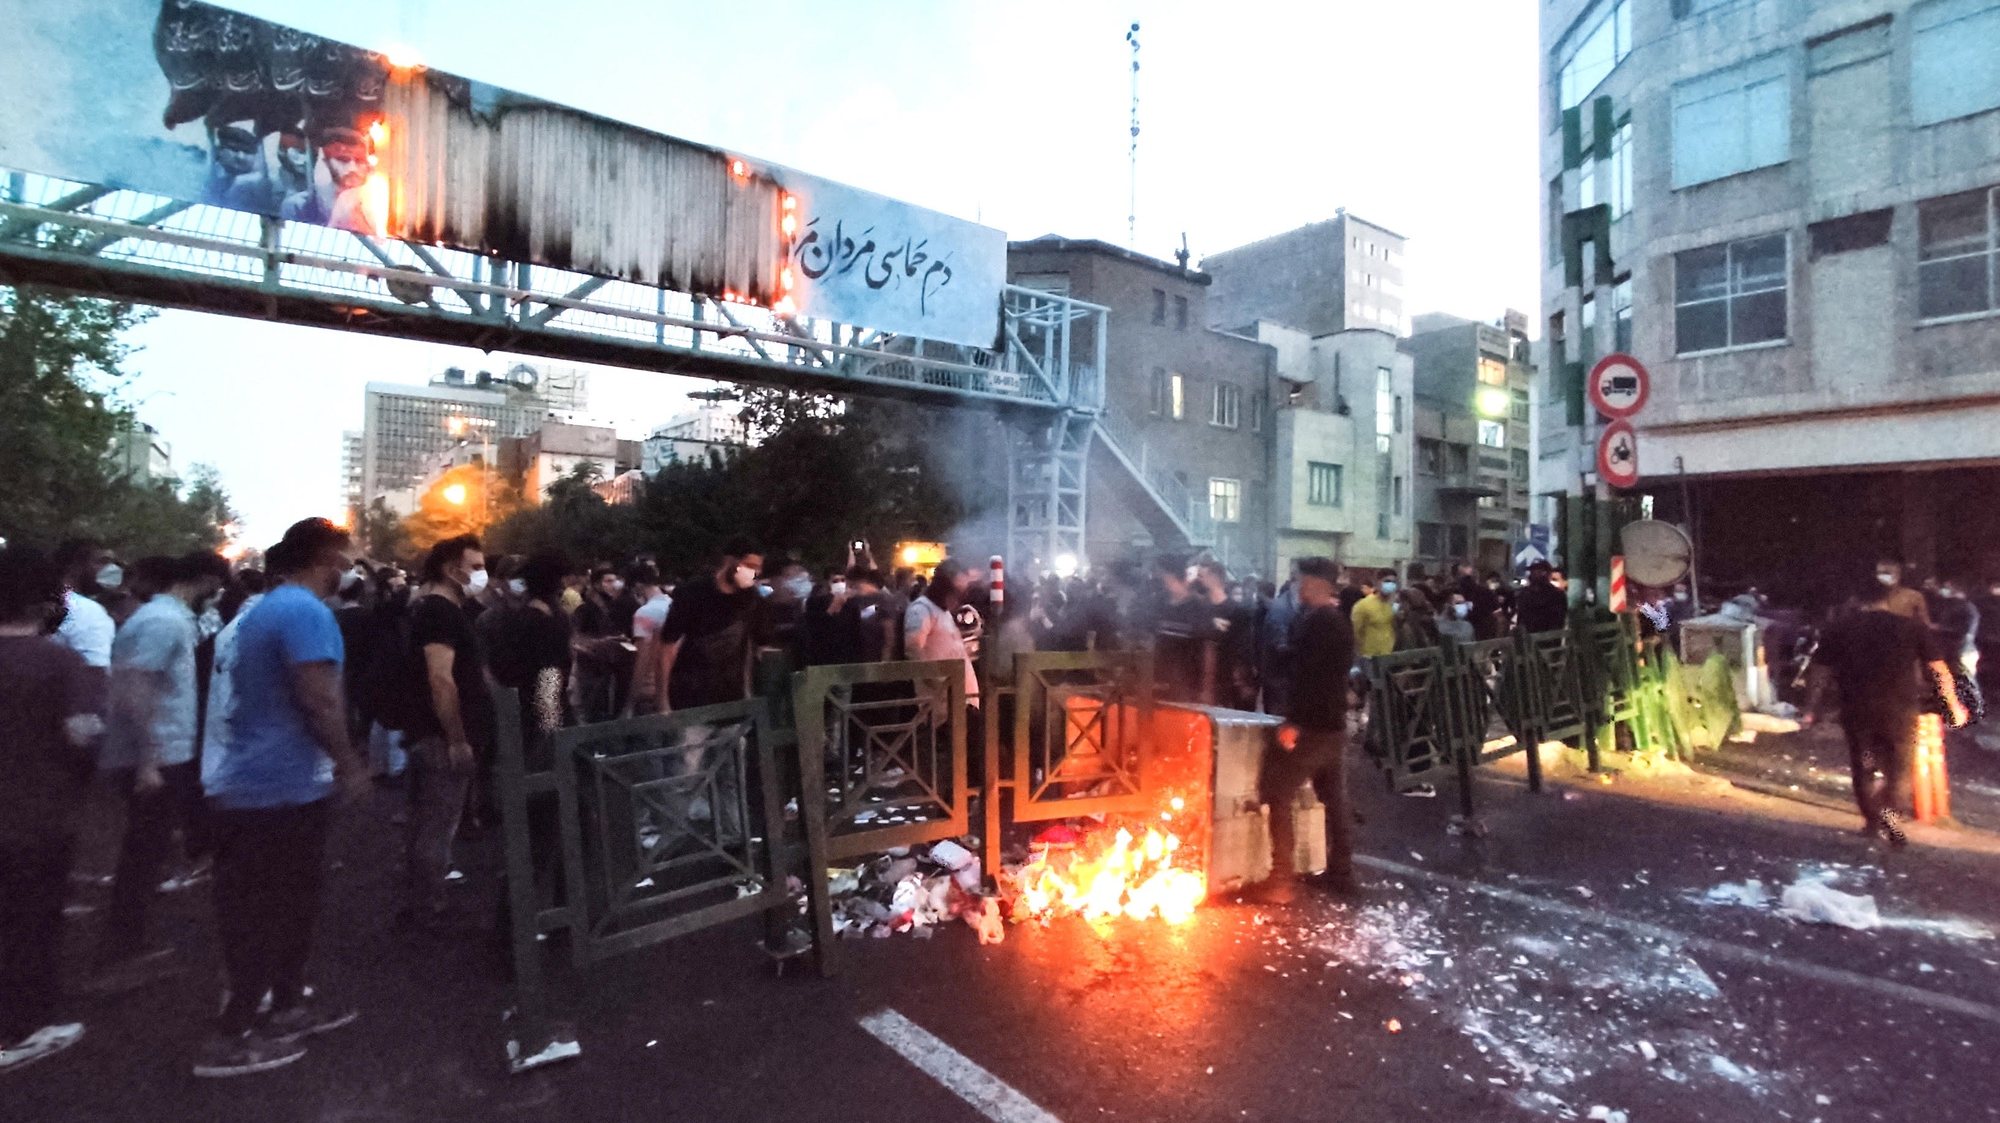 epa10197705 People clash with police during a protest  following the death of Mahsa Amini, in Tehran, Iran, 21 September 2022. Mahsa Amini, a 22-year-old Iranian woman, was arrested in Tehran on 13 September by the morality police, a unit responsible for enforcing Iran&#039;s strict dress code for women. She fell into a coma while in police custody and was declared dead on 16 September, with the authorities saying she died of a heart failure while her family advising that she had no prior health conditions. Her death has triggered protests in various areas in Iran and around the world. According to Iran&#039;s state news agency IRNA, Iranian President Ebrahim Raisi expressed his sympathy to the family of Amini on a phone call and assured them that her death will be investigated carefully. Chief Justice of Iran Gholam-Hossein Mohseni-Eje&#039;i assured her family that upon its conclusion, the investigation results by the Iranian Legal Medicine Organization will be announced without any special considerations.  EPA/STR